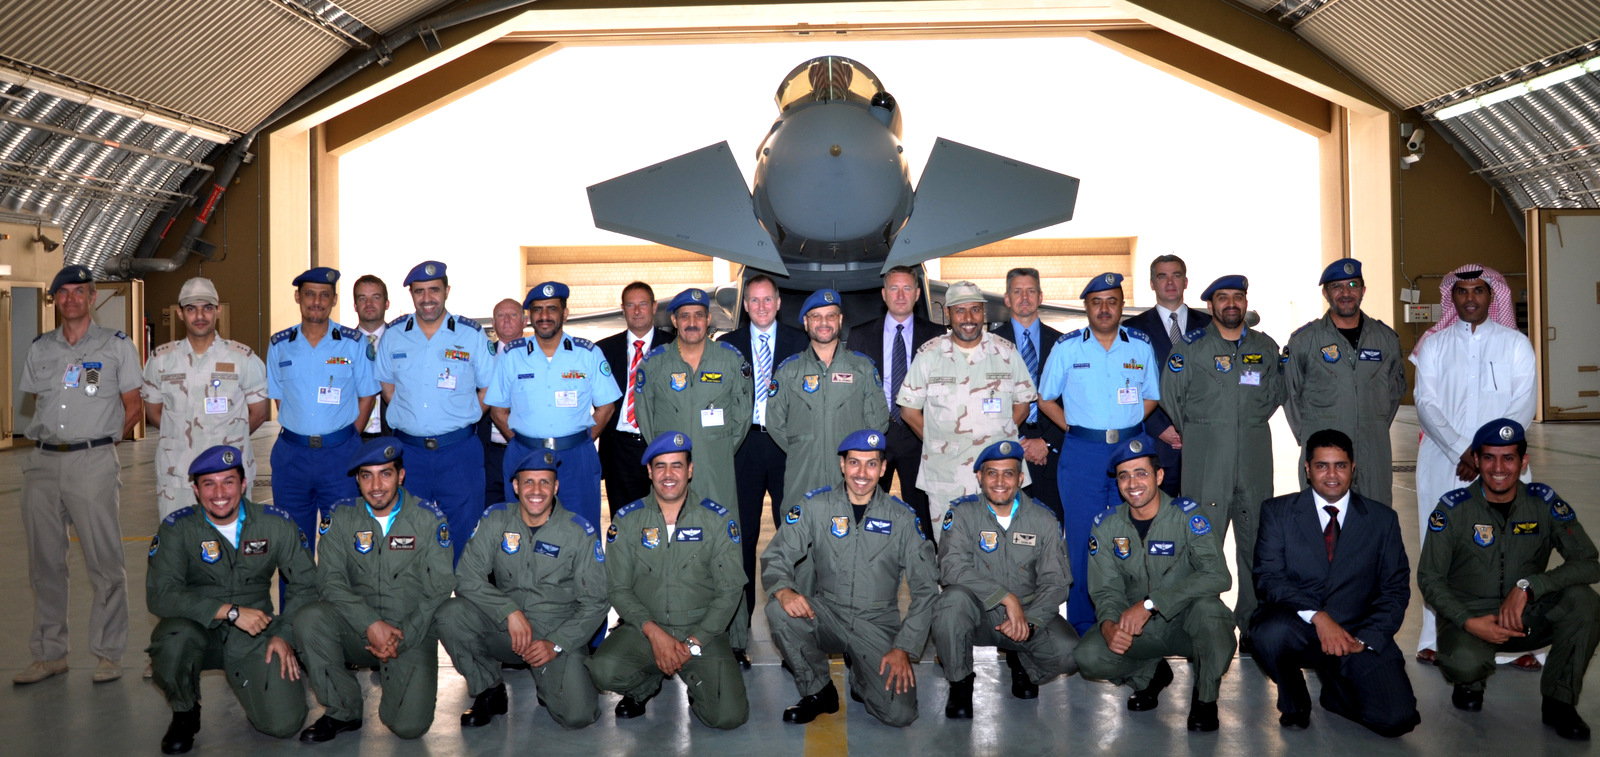 British military personell and employees of BAE systems pose with Saudi Air Force pilots in front of a British-made Typhoon.